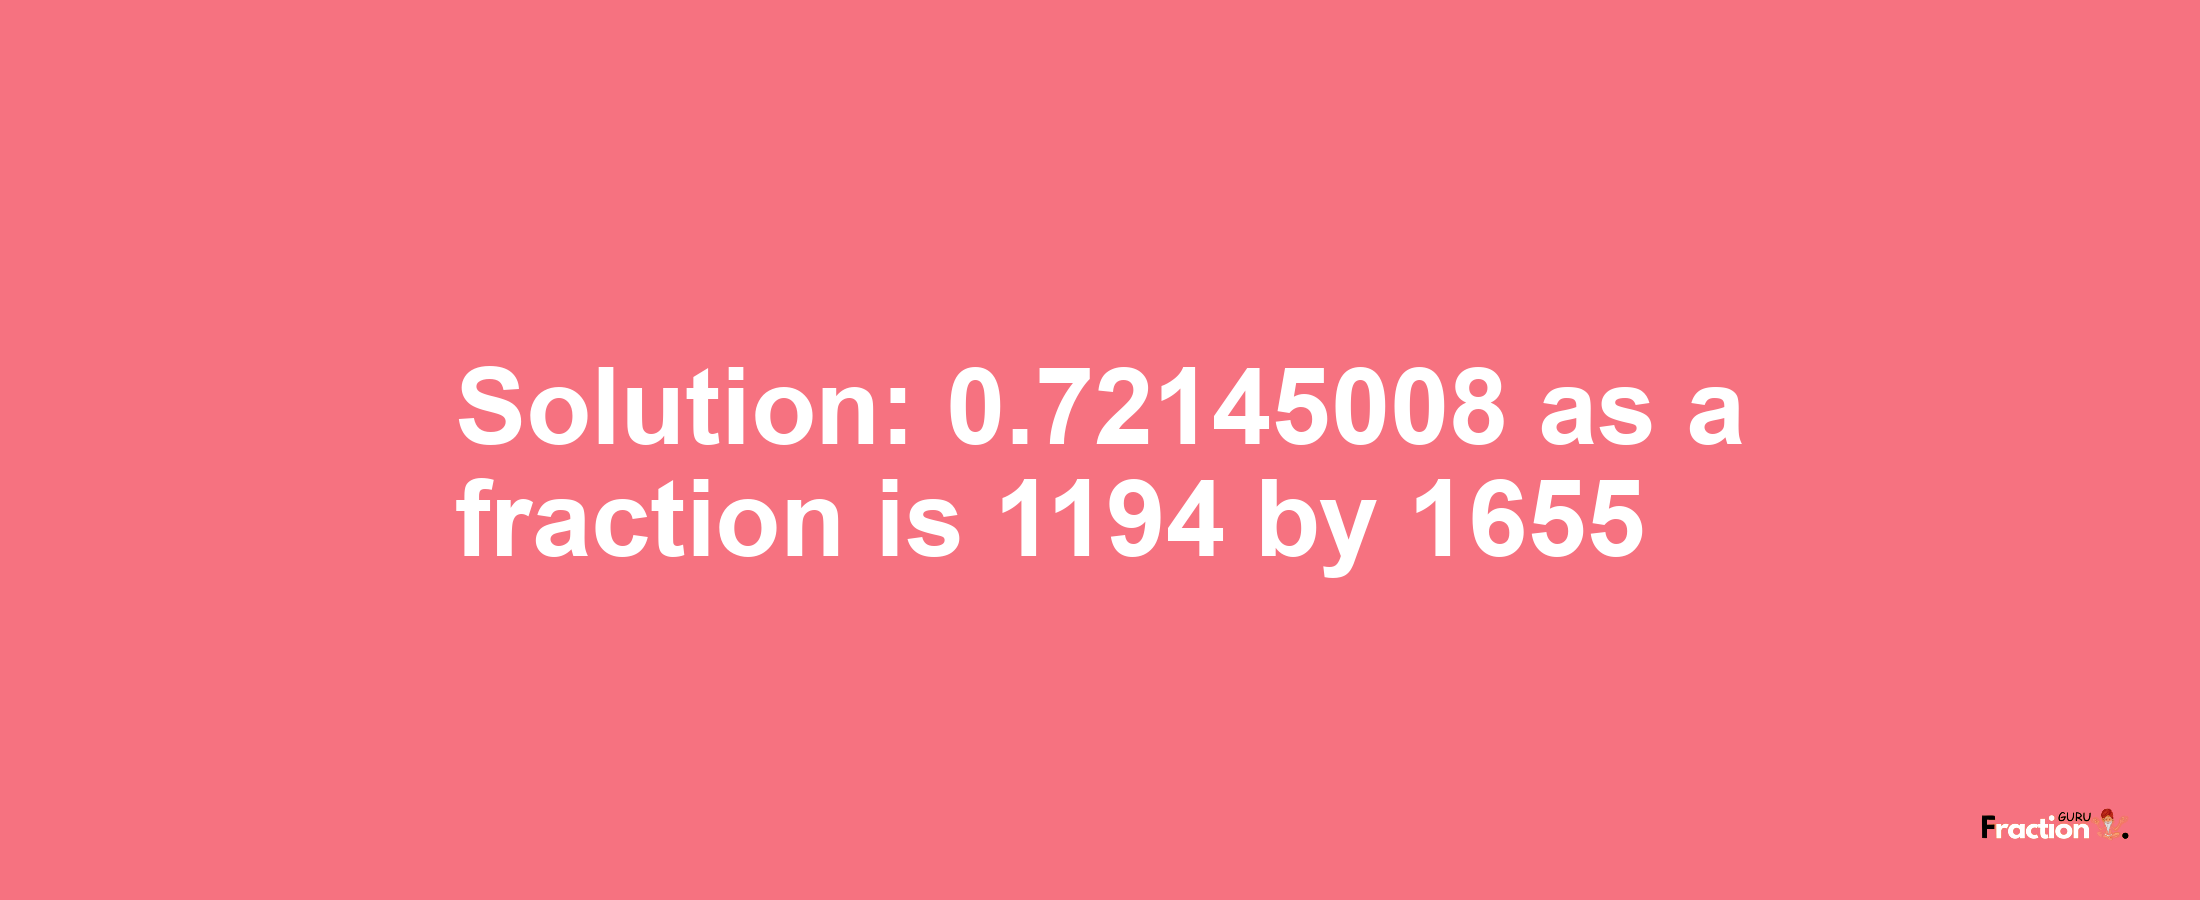 Solution:0.72145008 as a fraction is 1194/1655